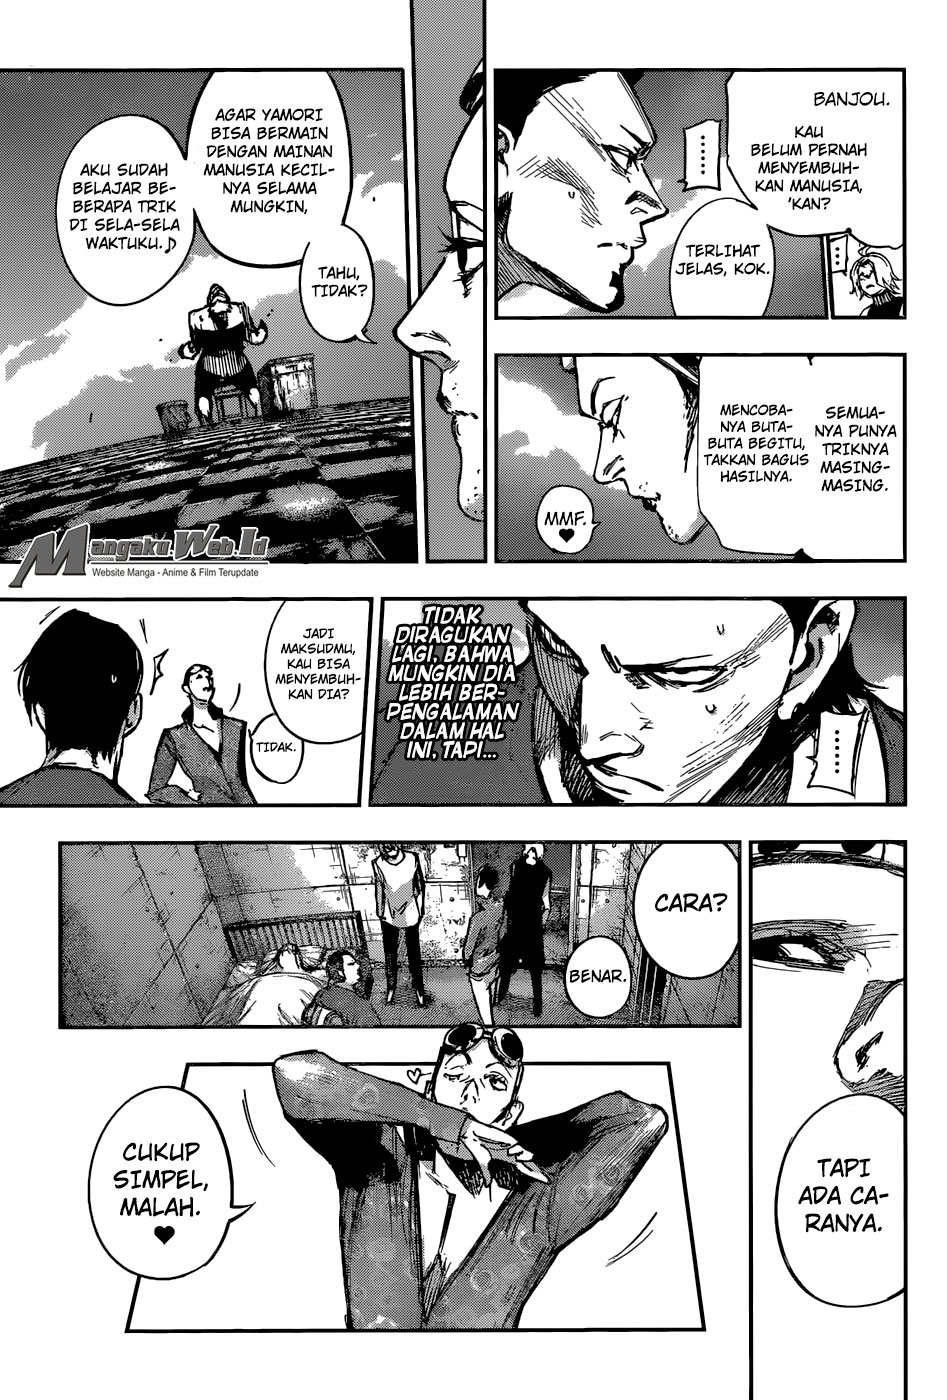 Tokyo Ghoul:re Chapter 102